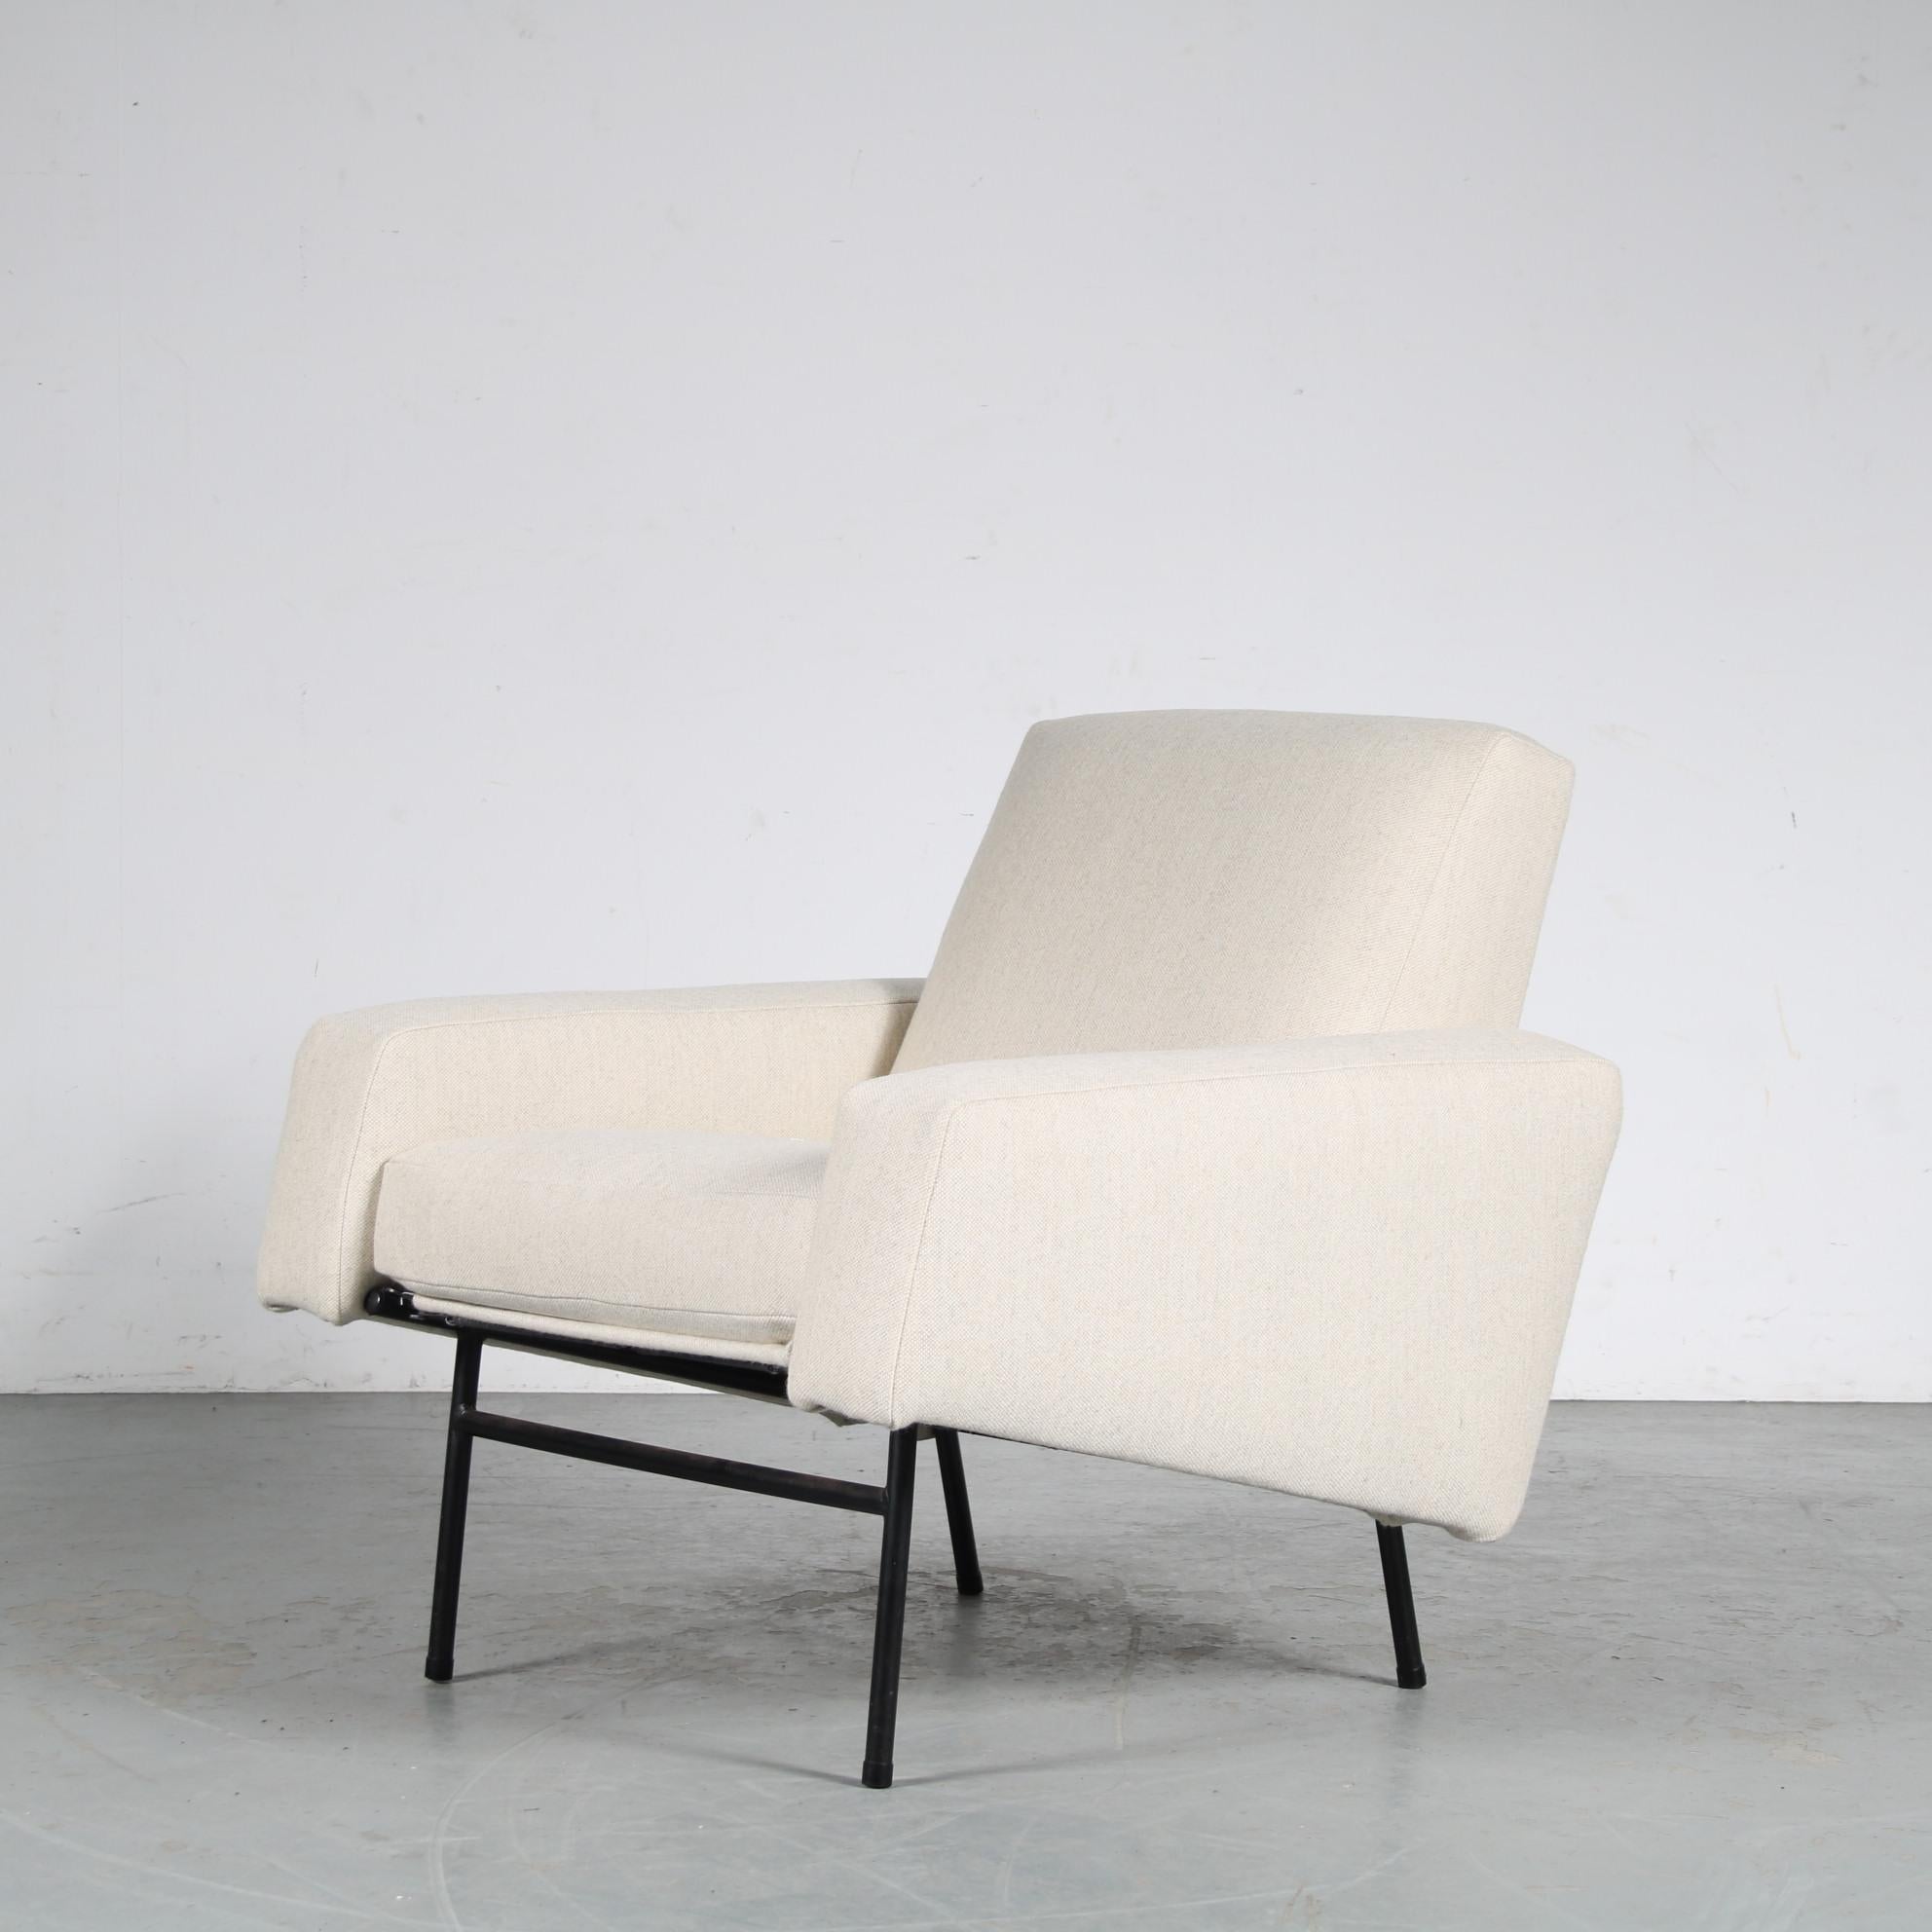 

A beautiful lounge chair designed by Pierre Guariche, manufactured by Airborne in France around 1960.

This eye-catching piece has a black lacquered, tubular metal frame. The seat is newly upholstered in high quality white fabric, which contrasts